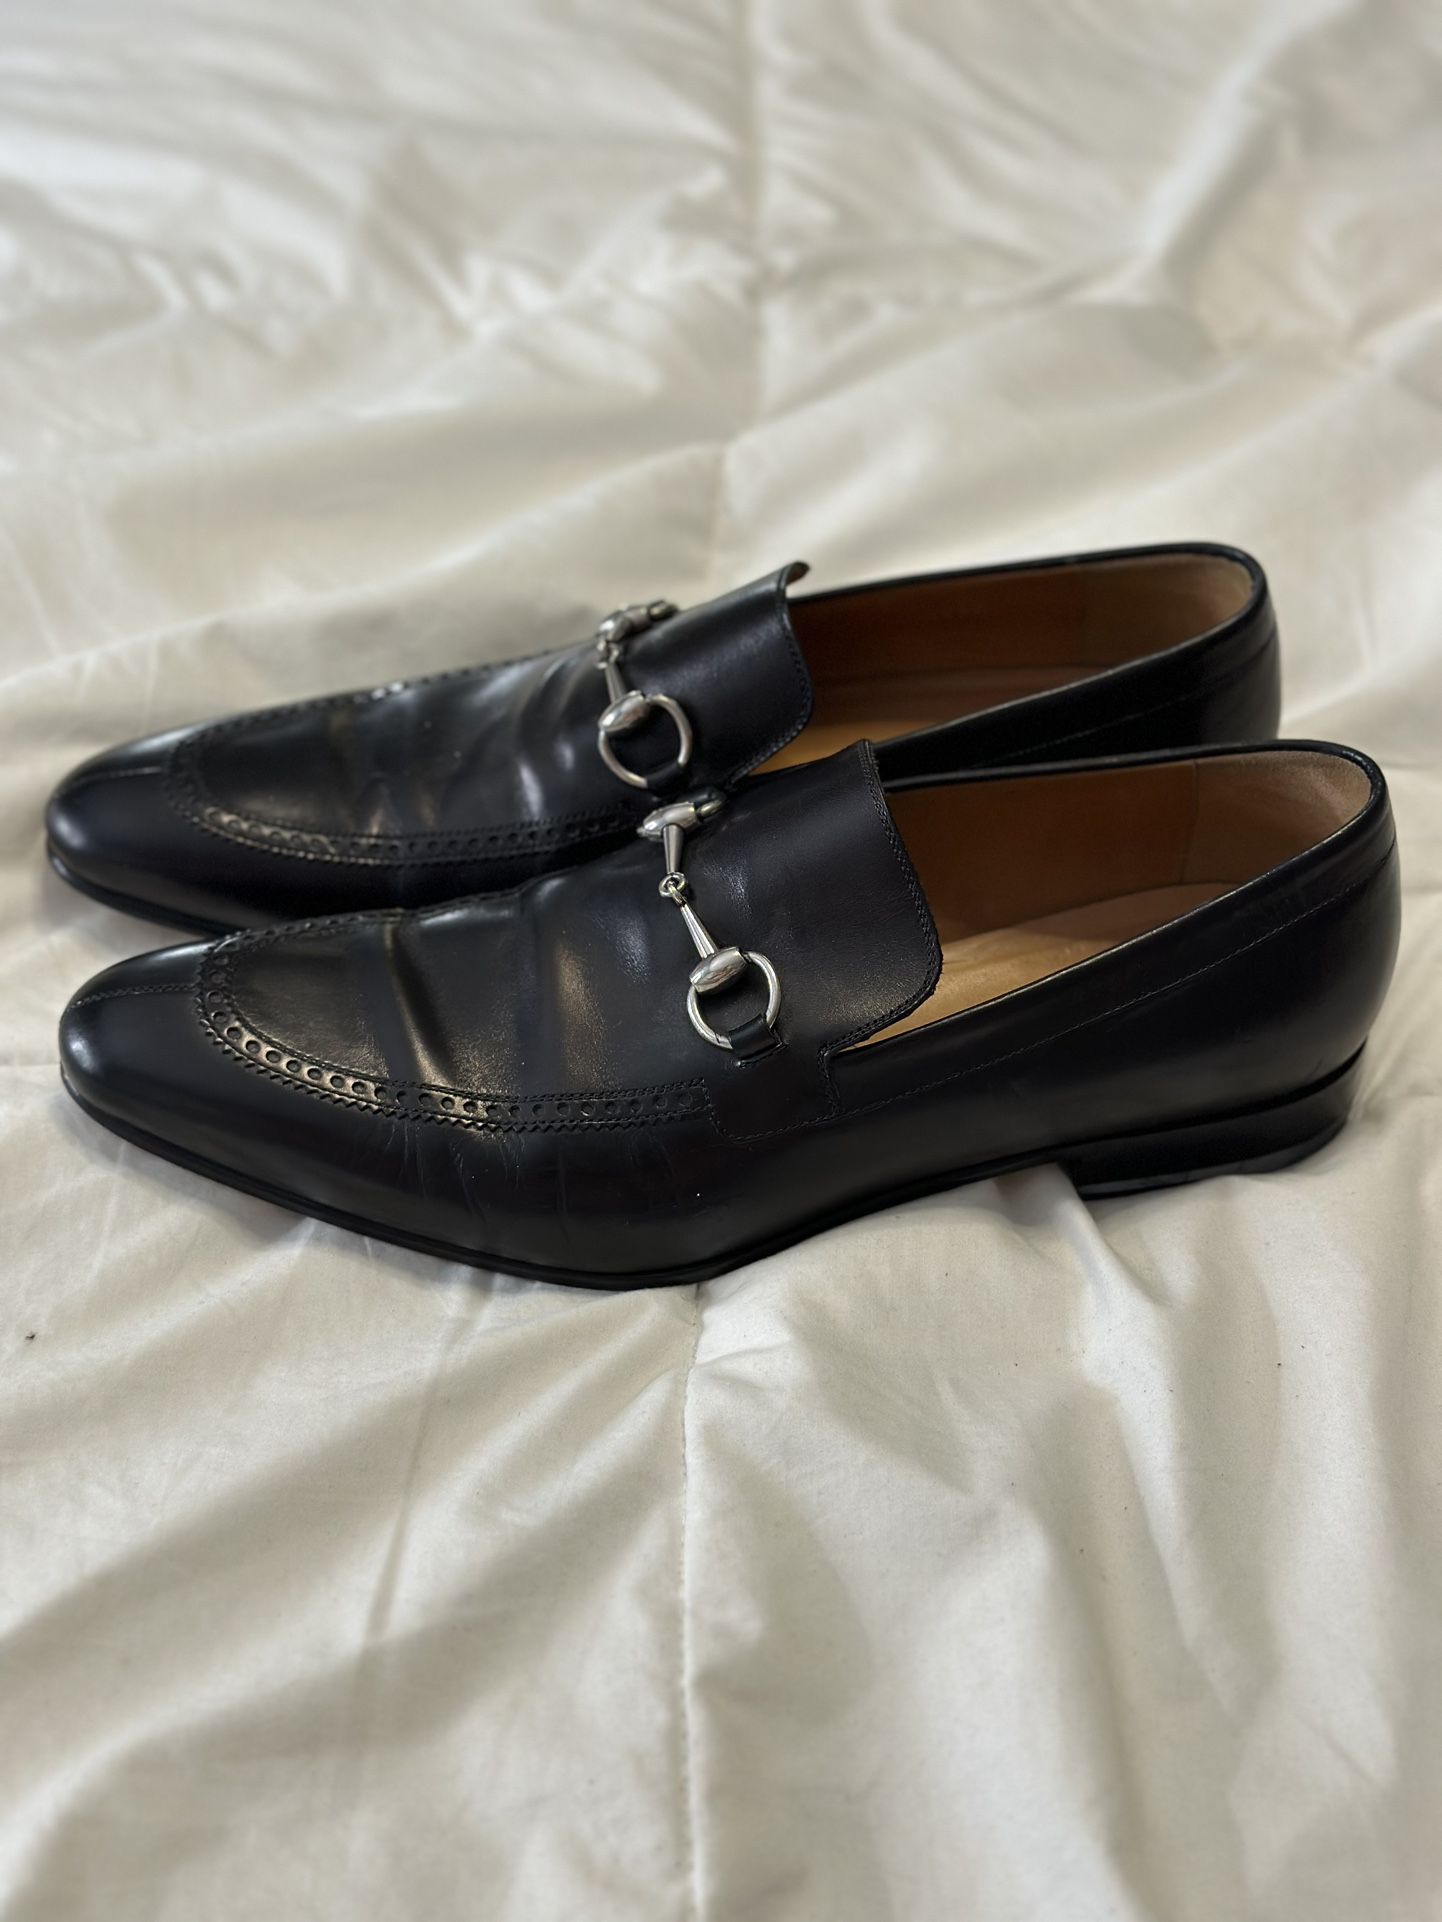 Gucci Loafers Size 10 US Men’s 